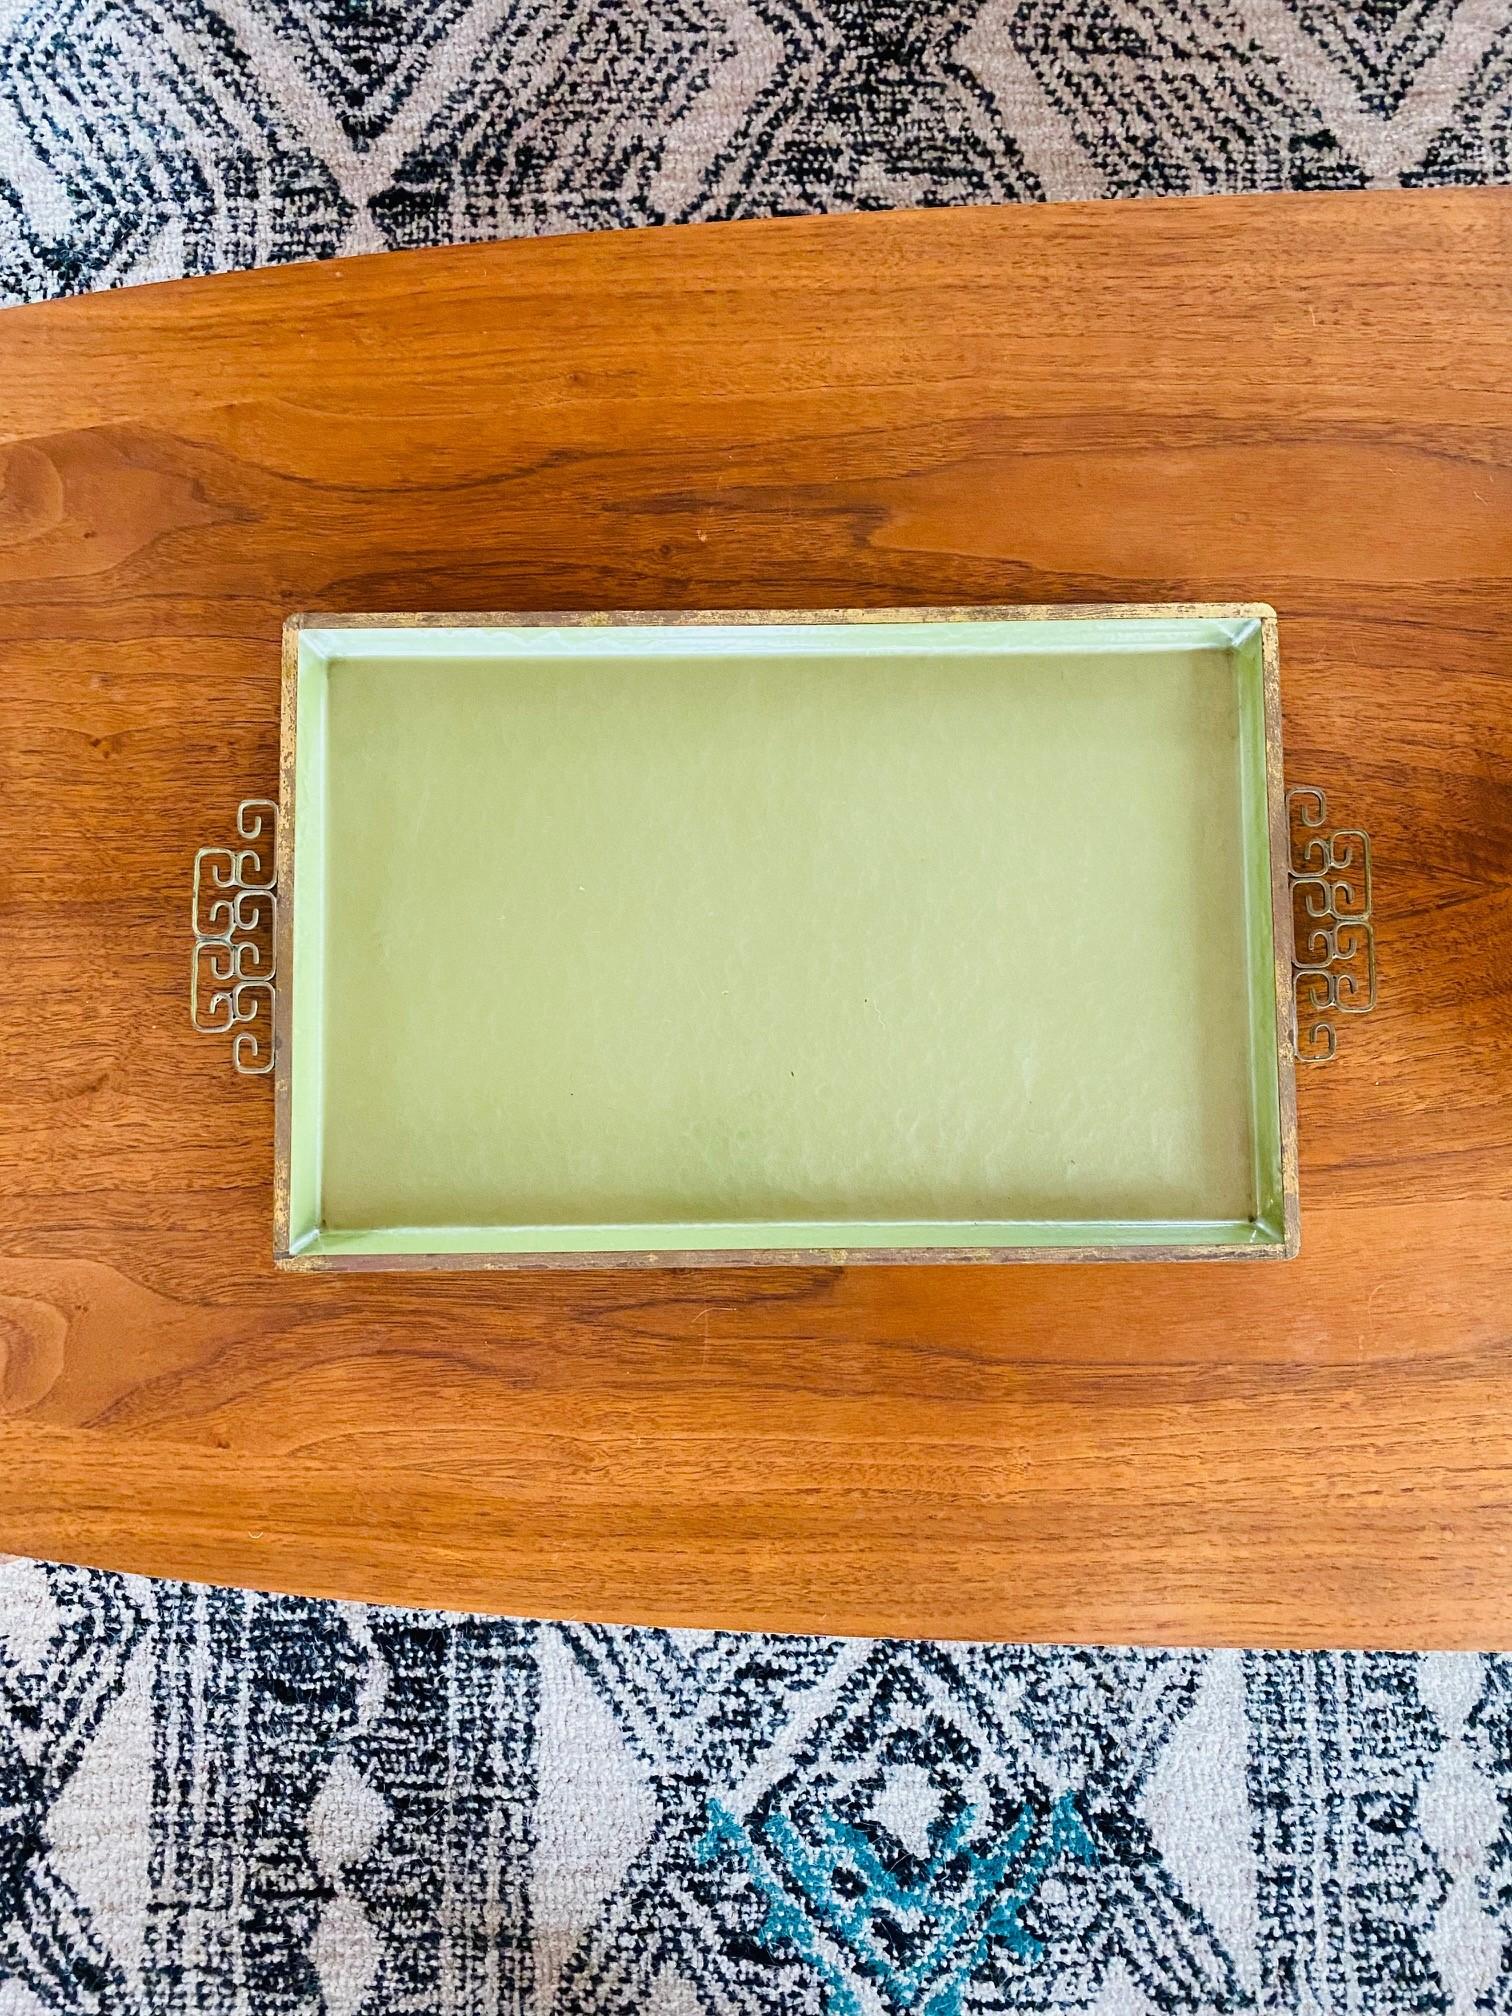 A piece of Southern California glamorous history, this vintage handmade Moire Glaze Kyes tray is composed of hammered metal with an enamel finish and double brass handles with ornate Greek key design. This beautiful piece is rectangular and with a